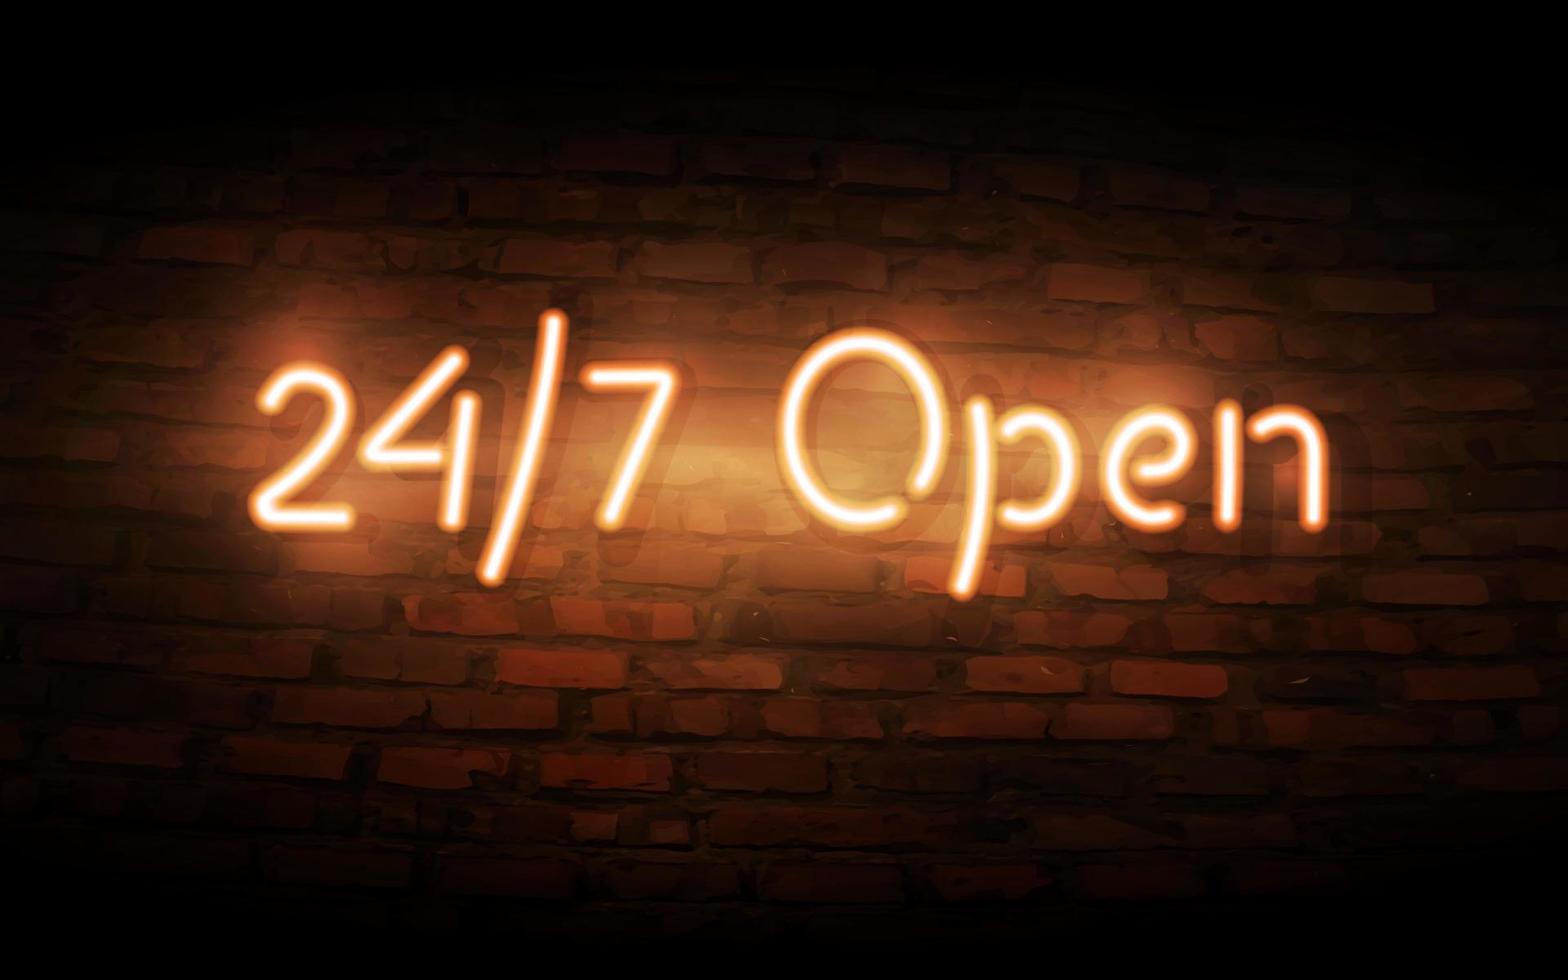 Neon Open 24 7 sign on brick wall background. vector